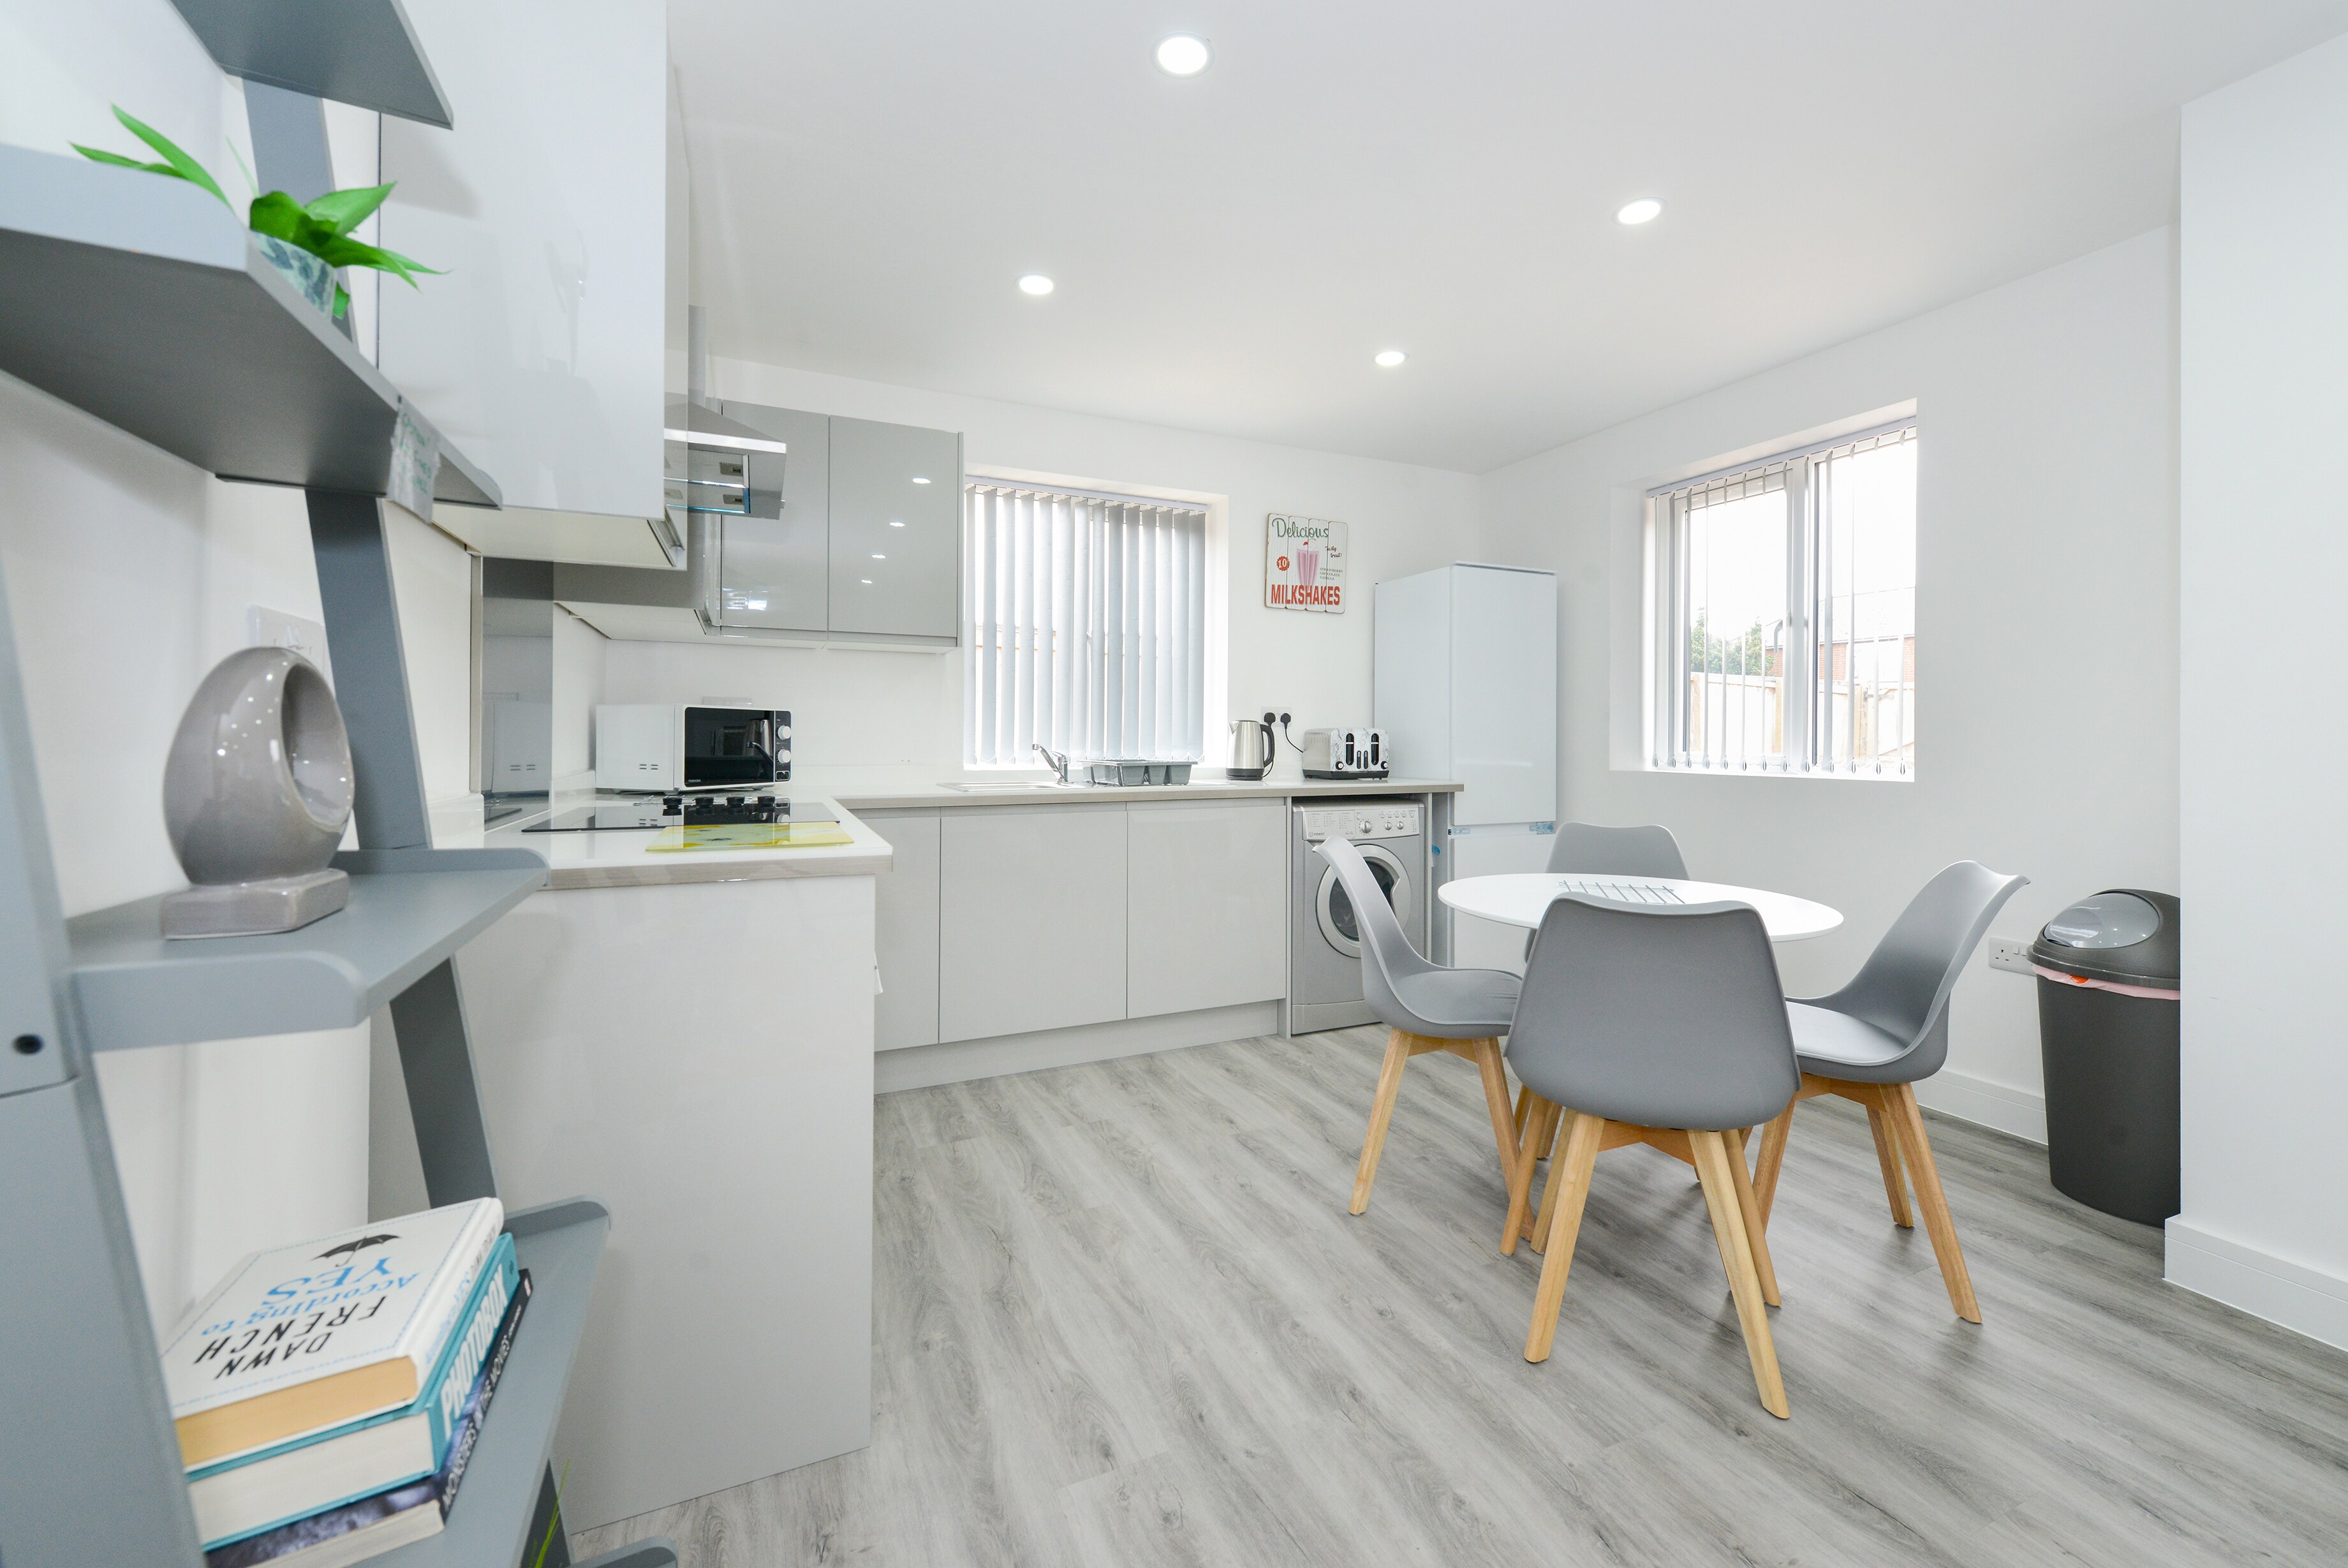 Property Image 2 - Escape to the City, 2bed, Low Carbon, Parking